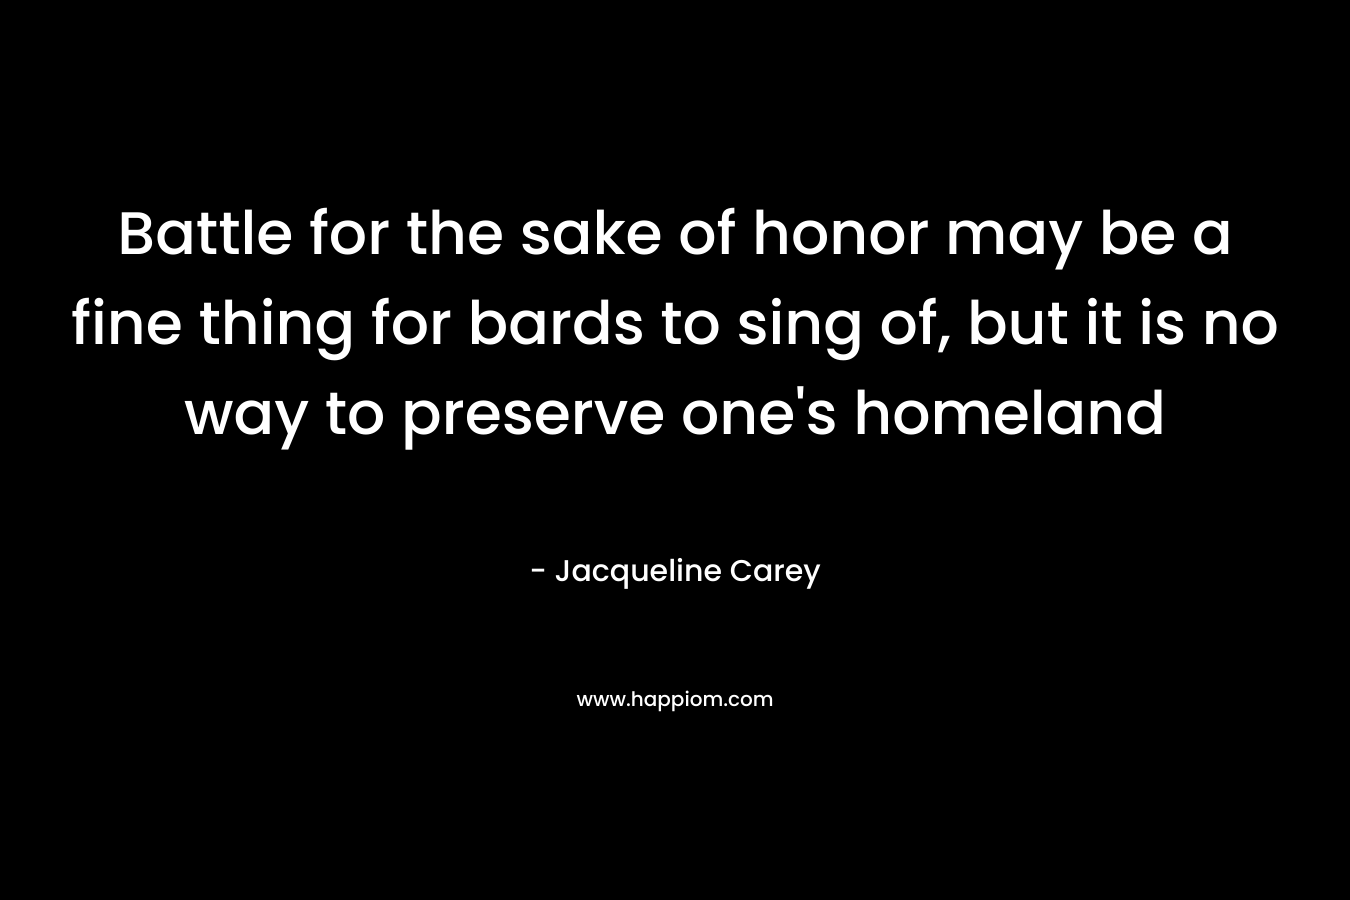 Battle for the sake of honor may be a fine thing for bards to sing of, but it is no way to preserve one's homeland